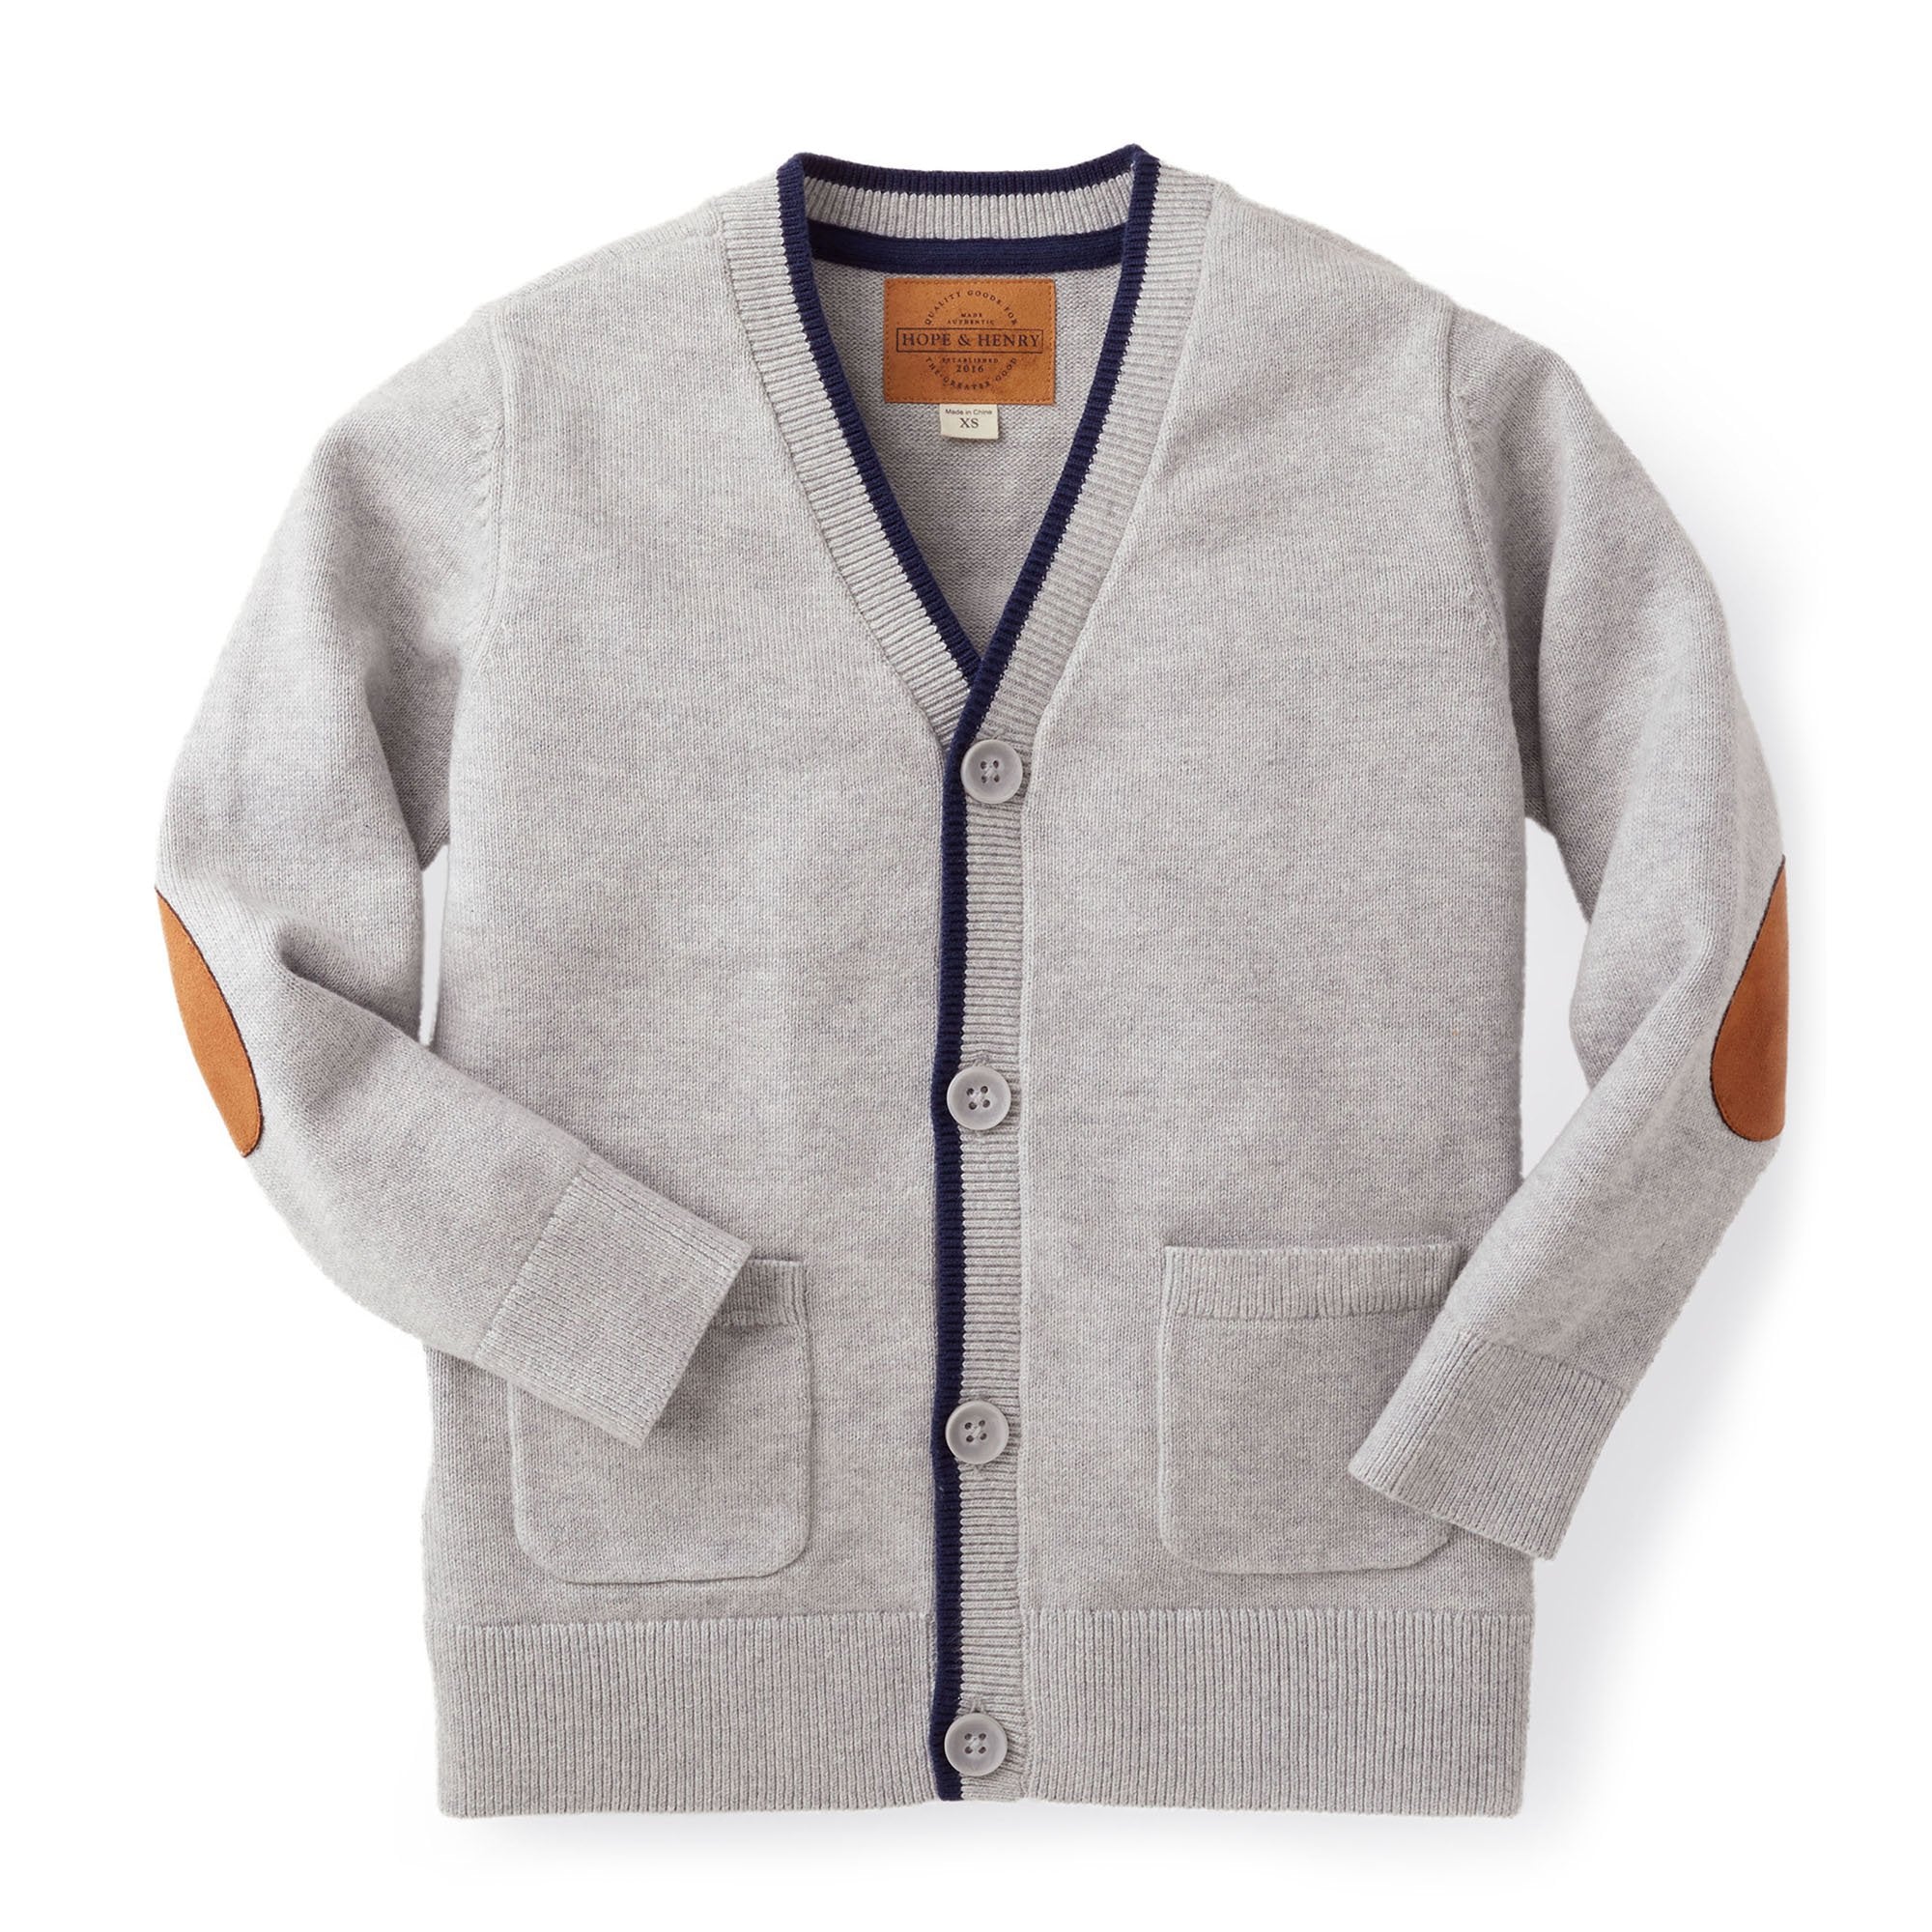 Hope & Henry Boys' Tipped Cardigan with Elbow Patches (Light Gray, 6-12 Months)